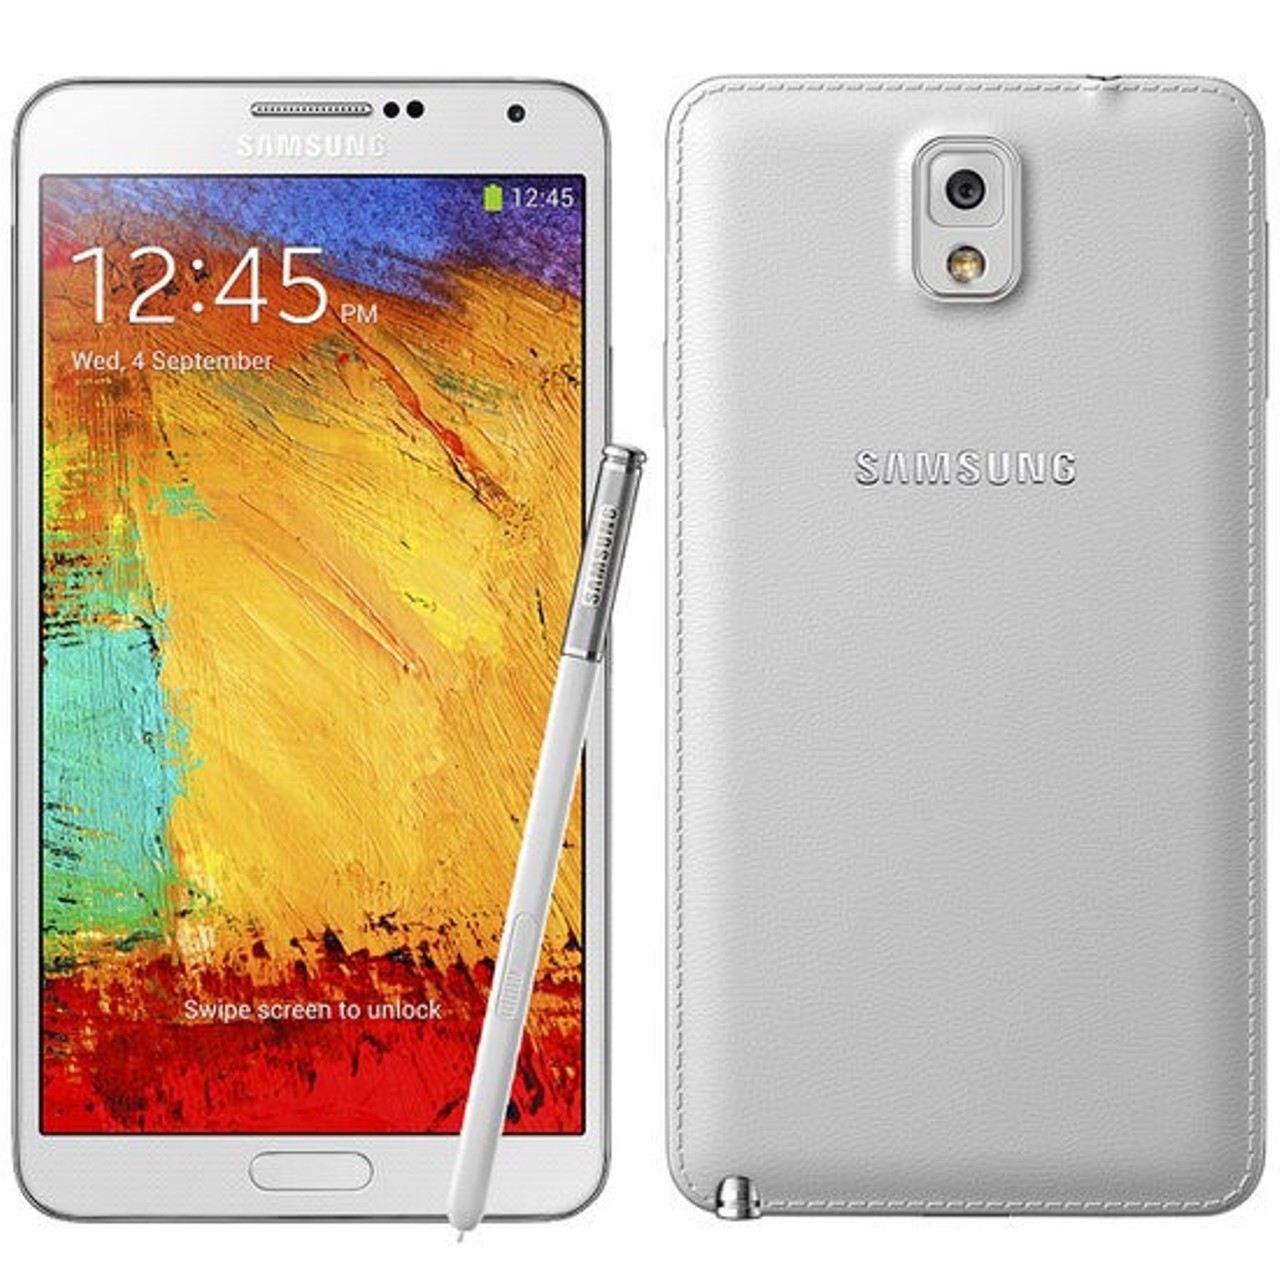 What is Samsung Galaxy Note 3 | CloneDVD Blog